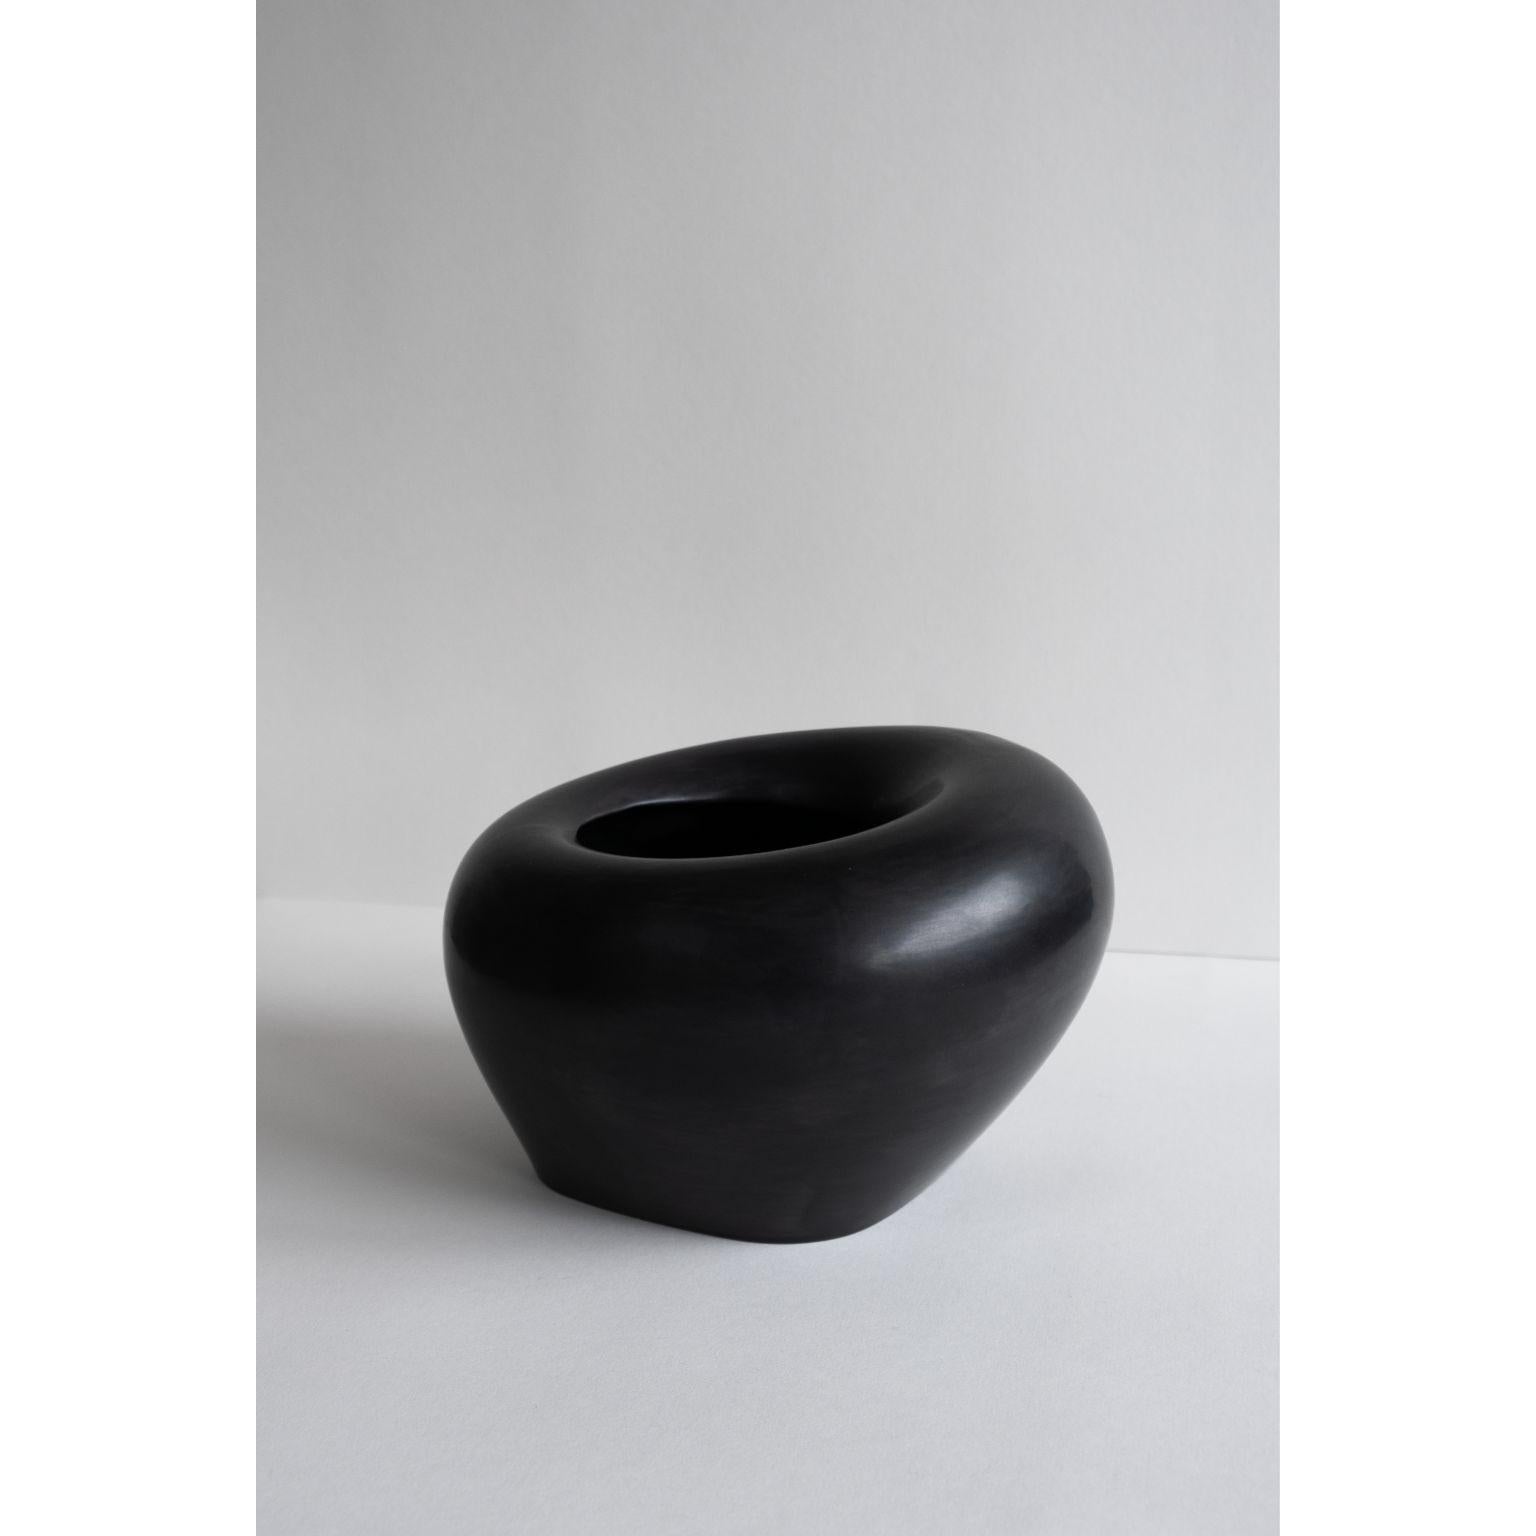 Flexible Formed Vase 3 by Rino Claessens
Dimensions: D 26 x W 26 x H 16.5 cm.
Materials: Glazed ceramic.
Finish: Satin gloss black glaze.
Weight: 1.7 kg.

Handmade in Eindhoven, the Netherlands. This product is handcrafted and may exhibit